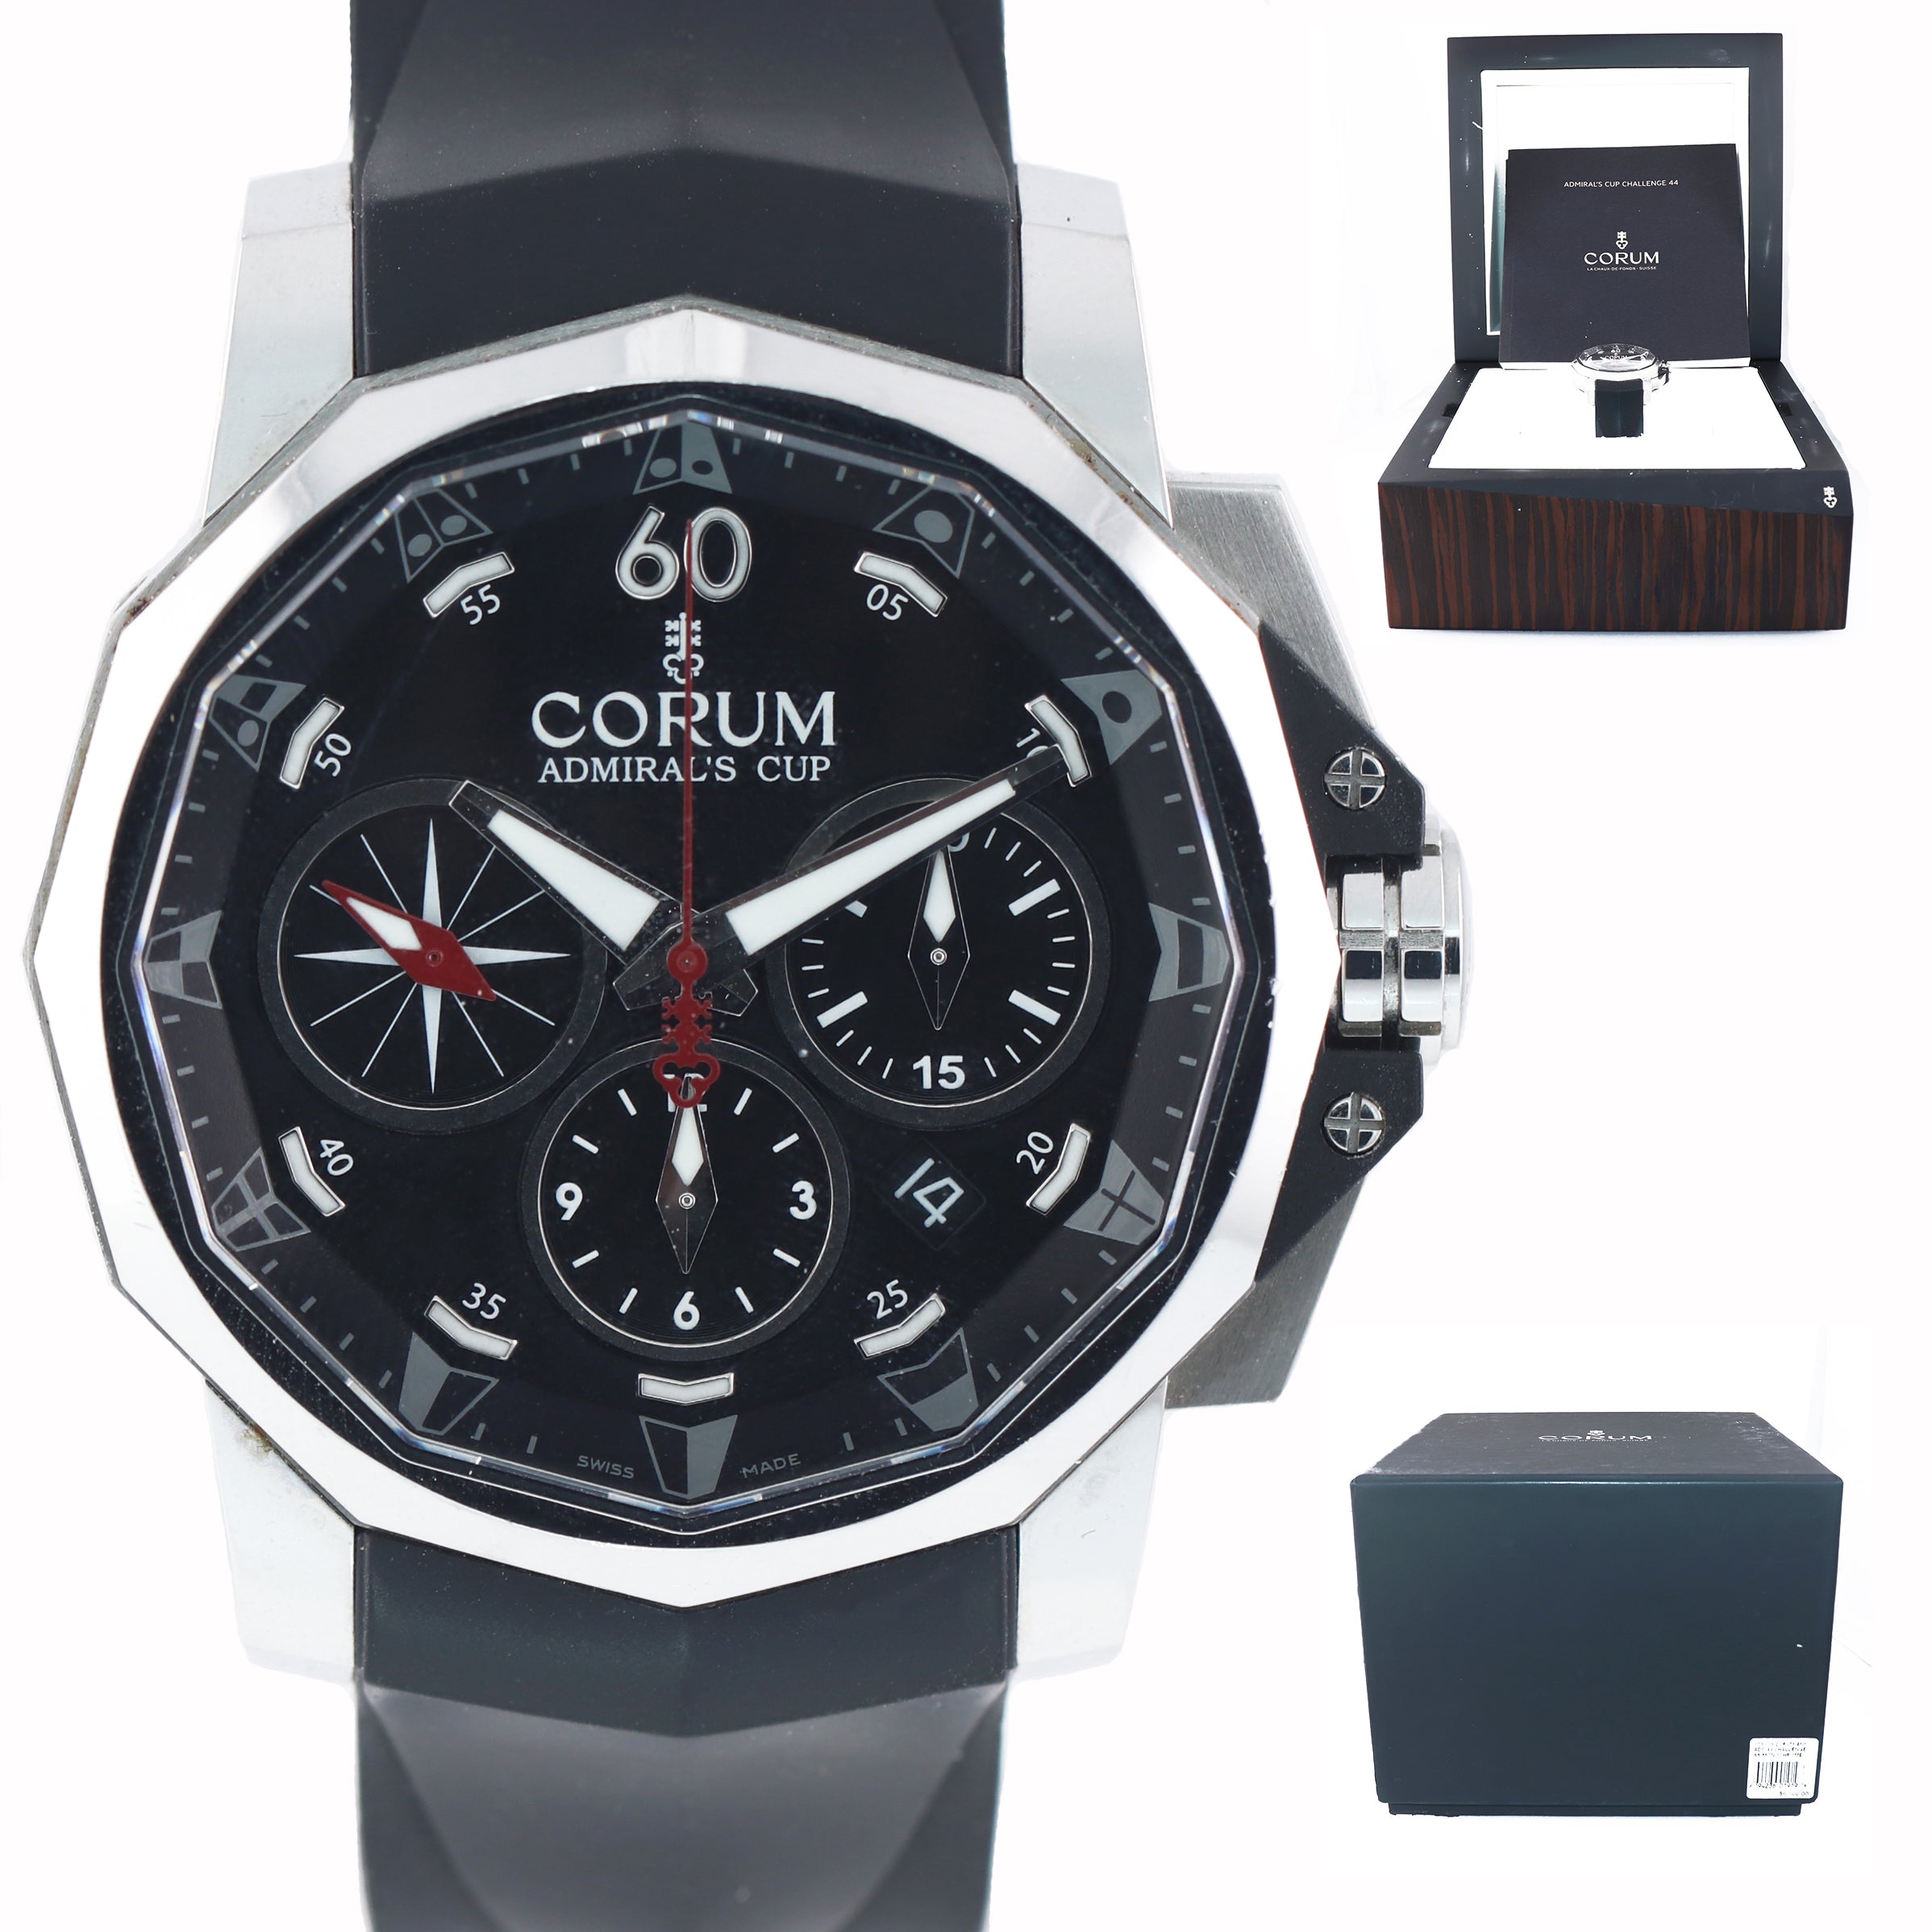 BOX PAPERS Corum Admiral's Cup Challenge 44 Steel 01.0071 Chronograph Date Watch